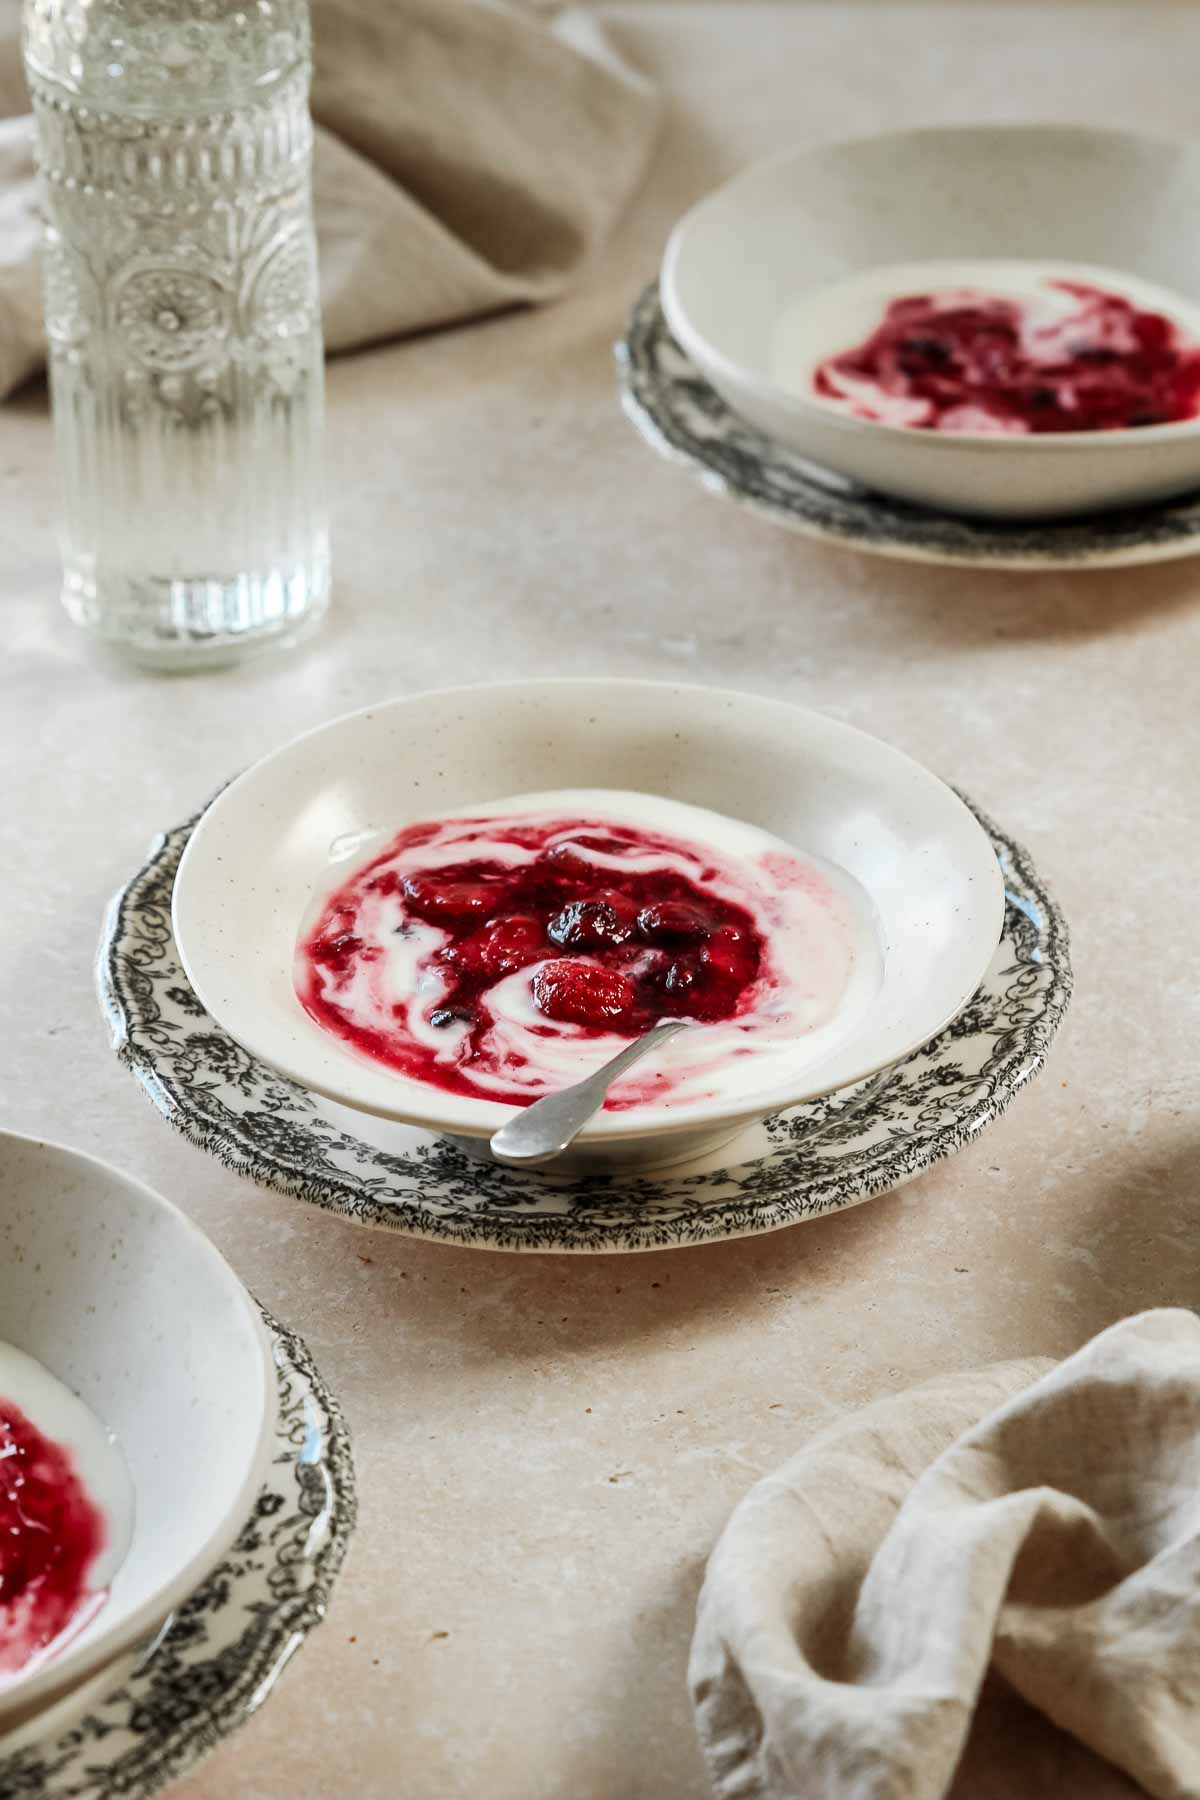 quick mixed berry compote in beige bowls on plates with flowers and vintage spoon.